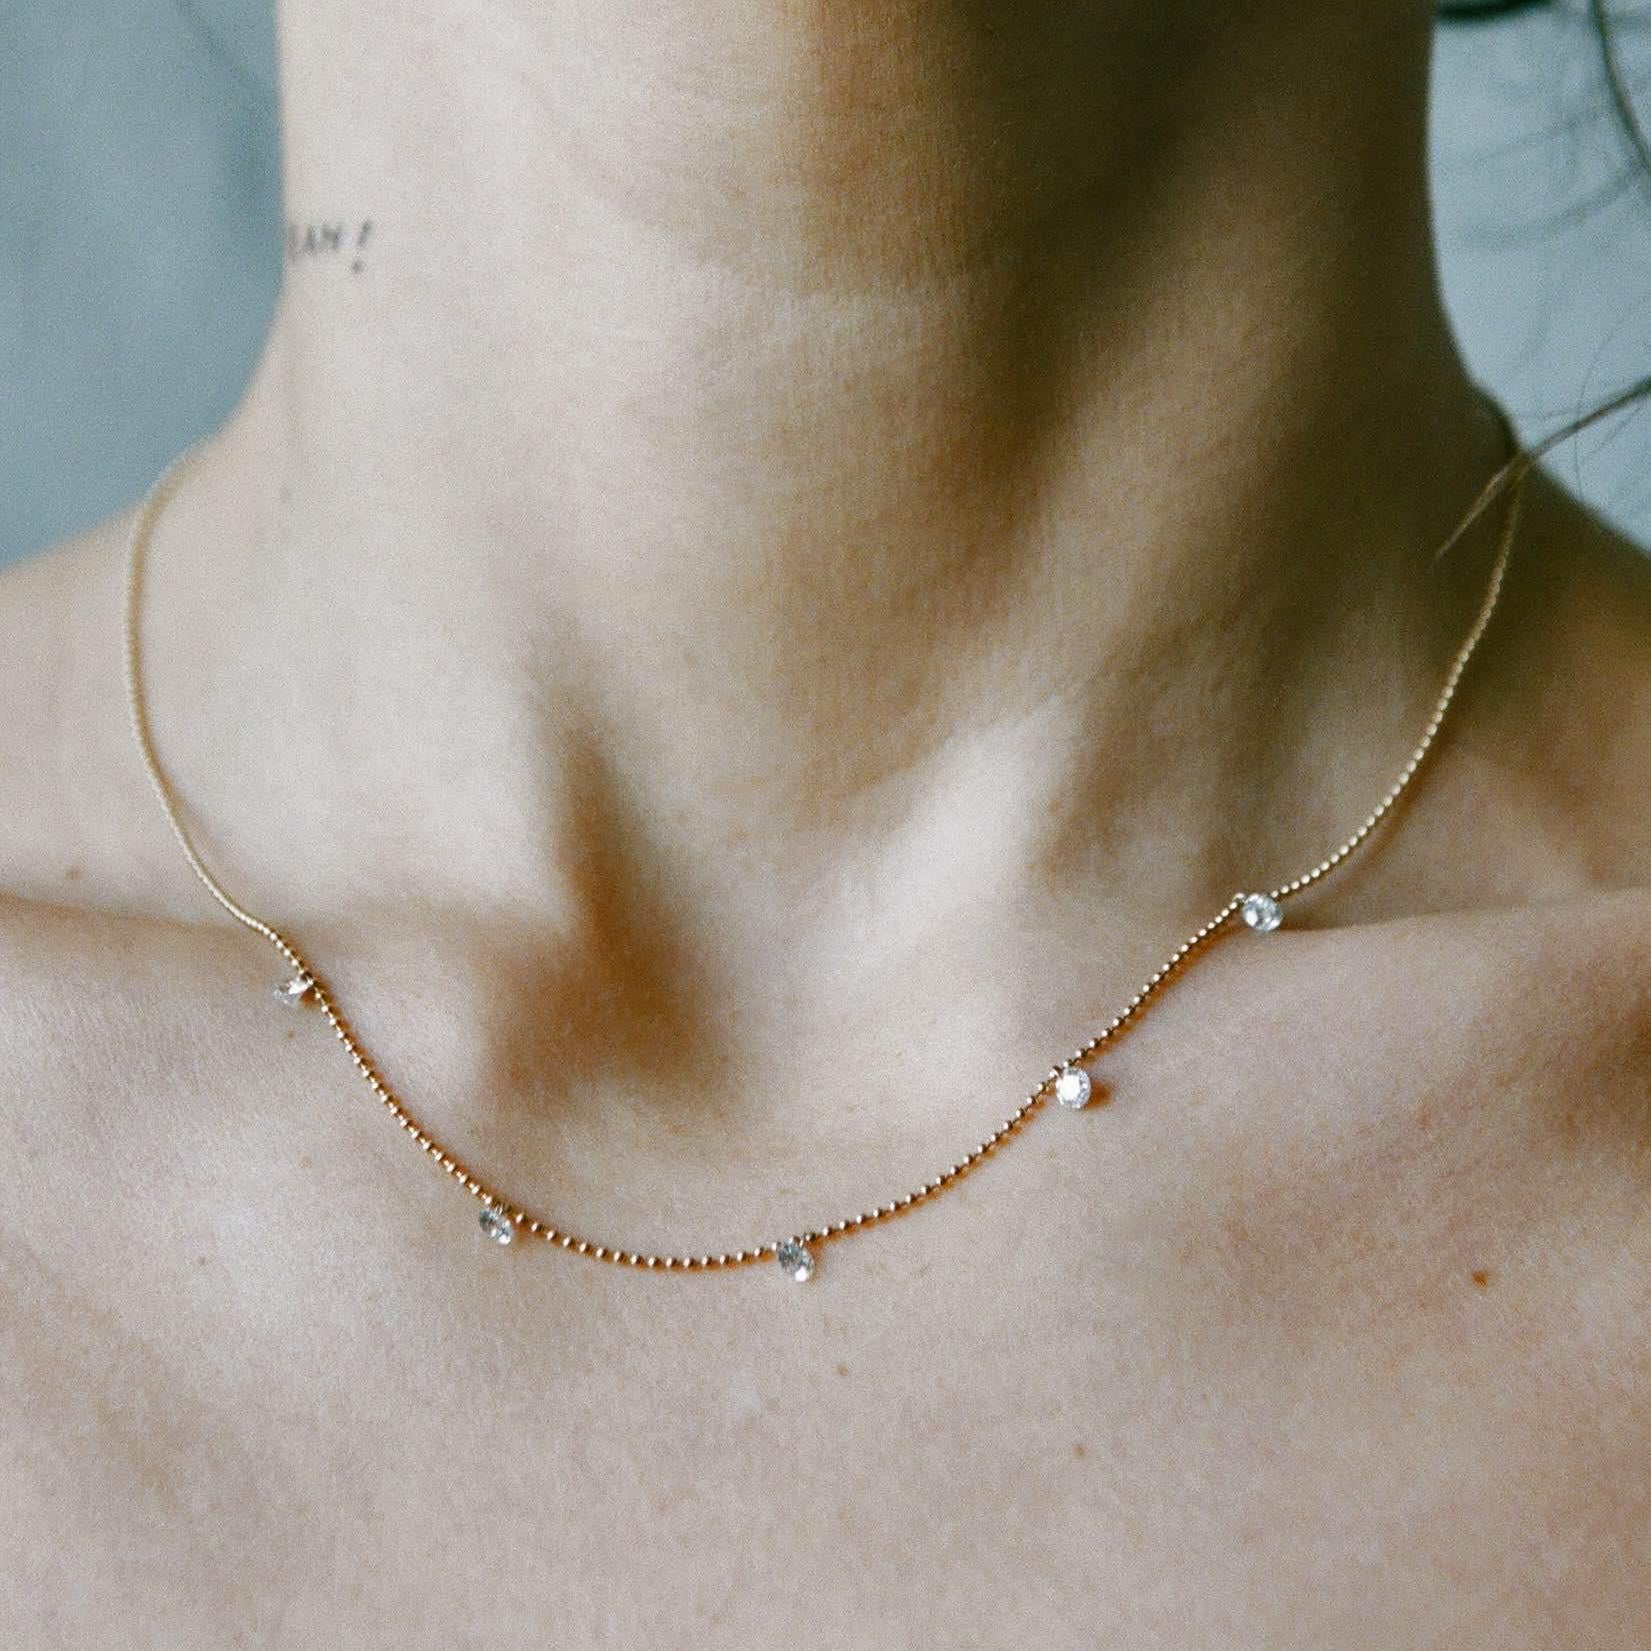 The Floating Diamond Necklace – designed and handmade by EMBLM Fine Jewelry

Like moonlight reflecting off of waves, the five white brilliant cut diamonds appear to float along the gold ball chain, a reminder to move with the tides of life.